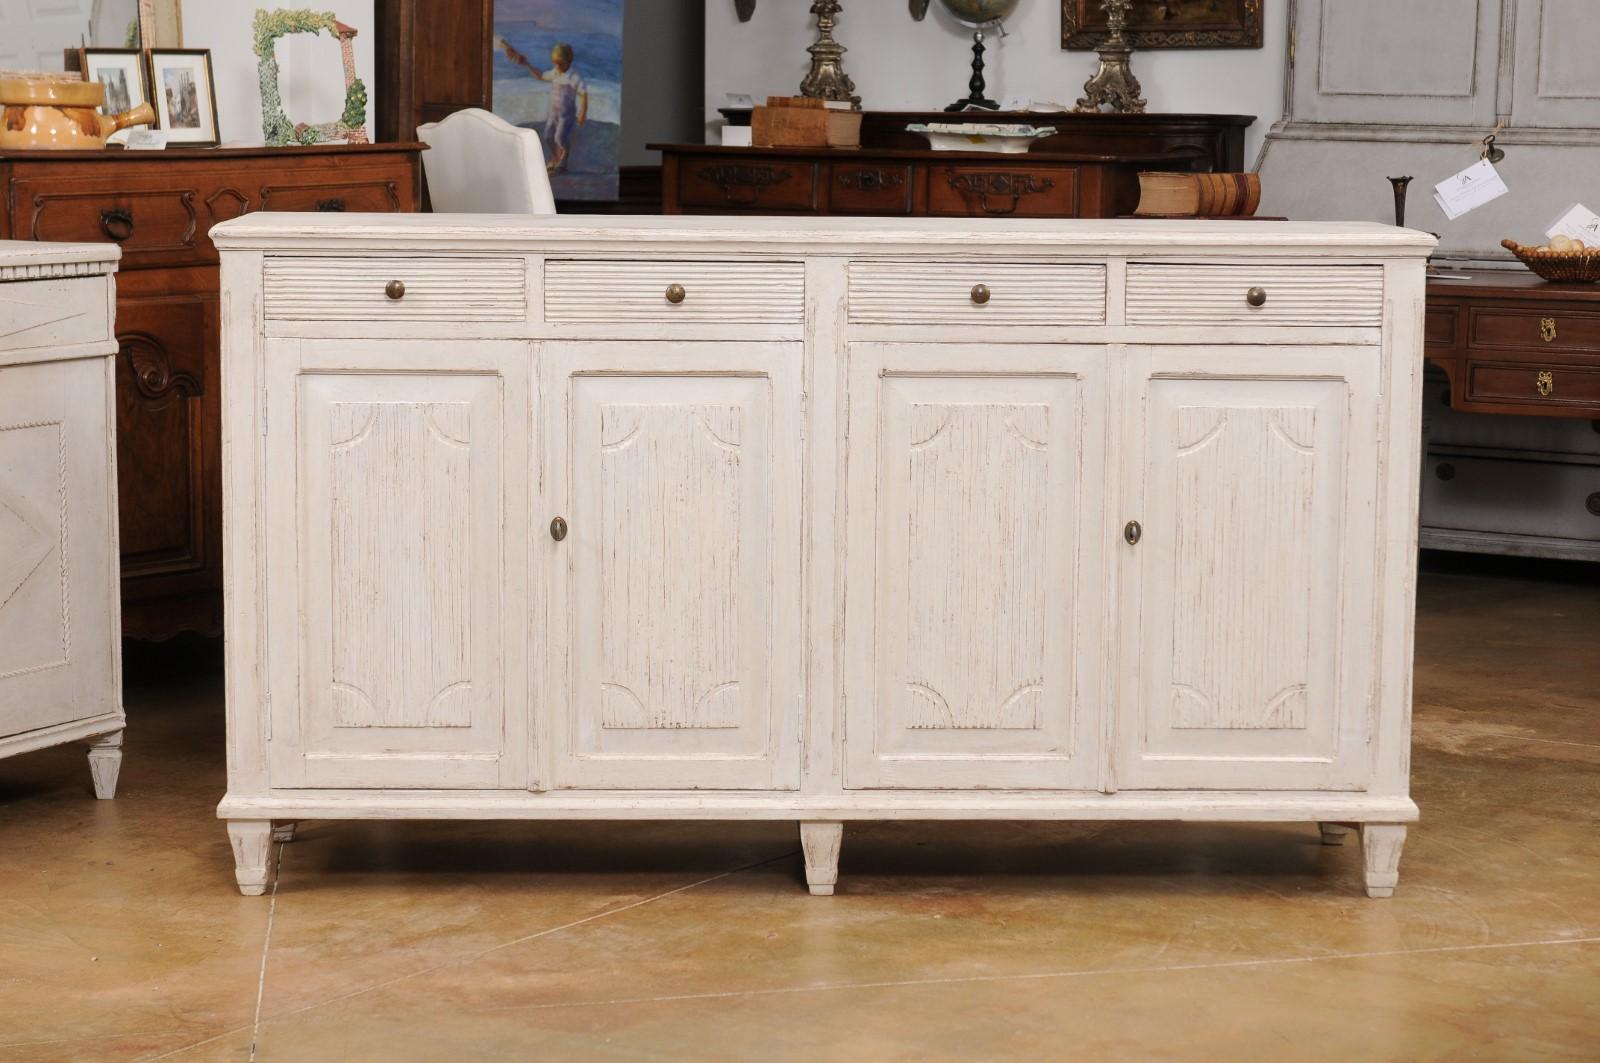 Swedish Gustavian Style 19th Century Painted Sideboard with Doors and Drawers For Sale 5